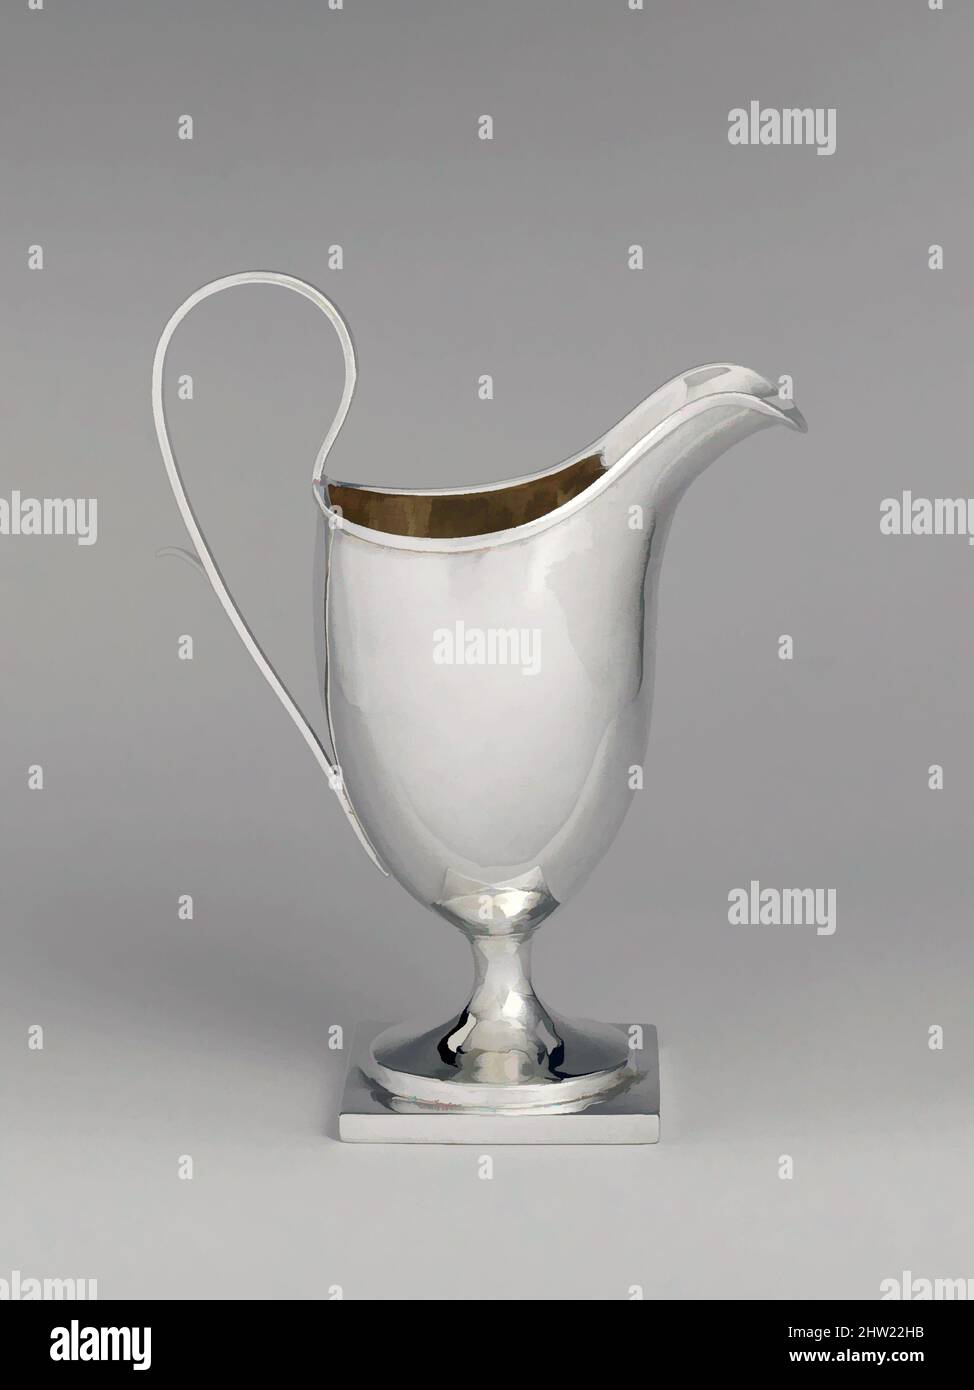 Art inspired by Creamer, 1770–1810, Possibly made in Alexandria, Virginia, United States, American, Silver, Overall: 6 x 4 7/8 in. (15.2 x 12.4 cm); 4 oz. 19 dwt. (153.8 g), Silver, Possibly by James Adam (1755–1798) or, Possibly by John Adam (1775–1848, Classic works modernized by Artotop with a splash of modernity. Shapes, color and value, eye-catching visual impact on art. Emotions through freedom of artworks in a contemporary way. A timeless message pursuing a wildly creative new direction. Artists turning to the digital medium and creating the Artotop NFT Stock Photo